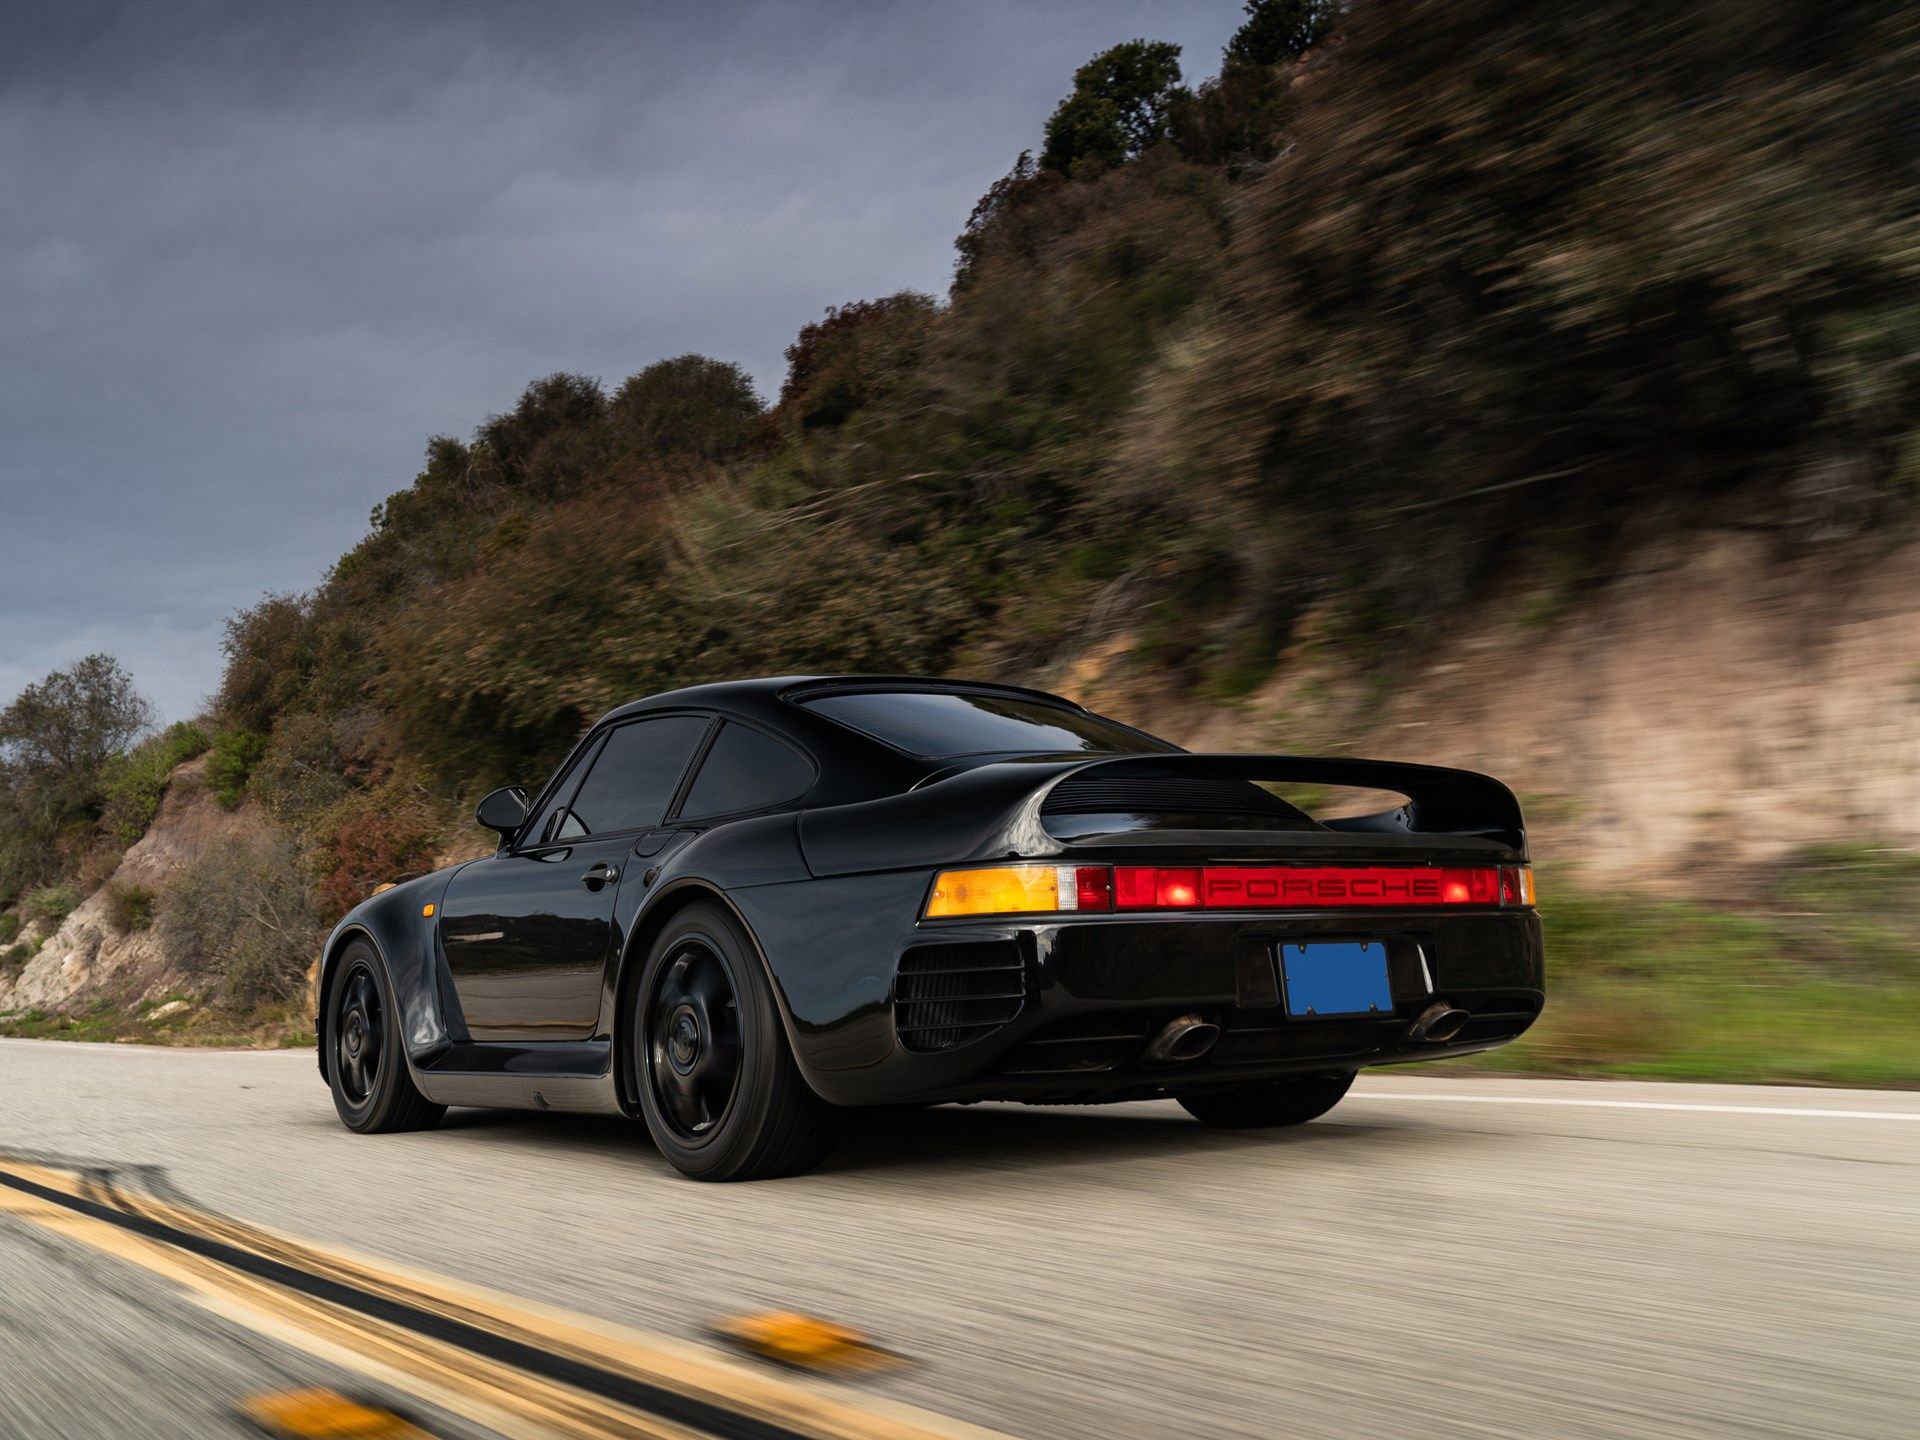 This Porsche 959 is packed with tech, and custom touches